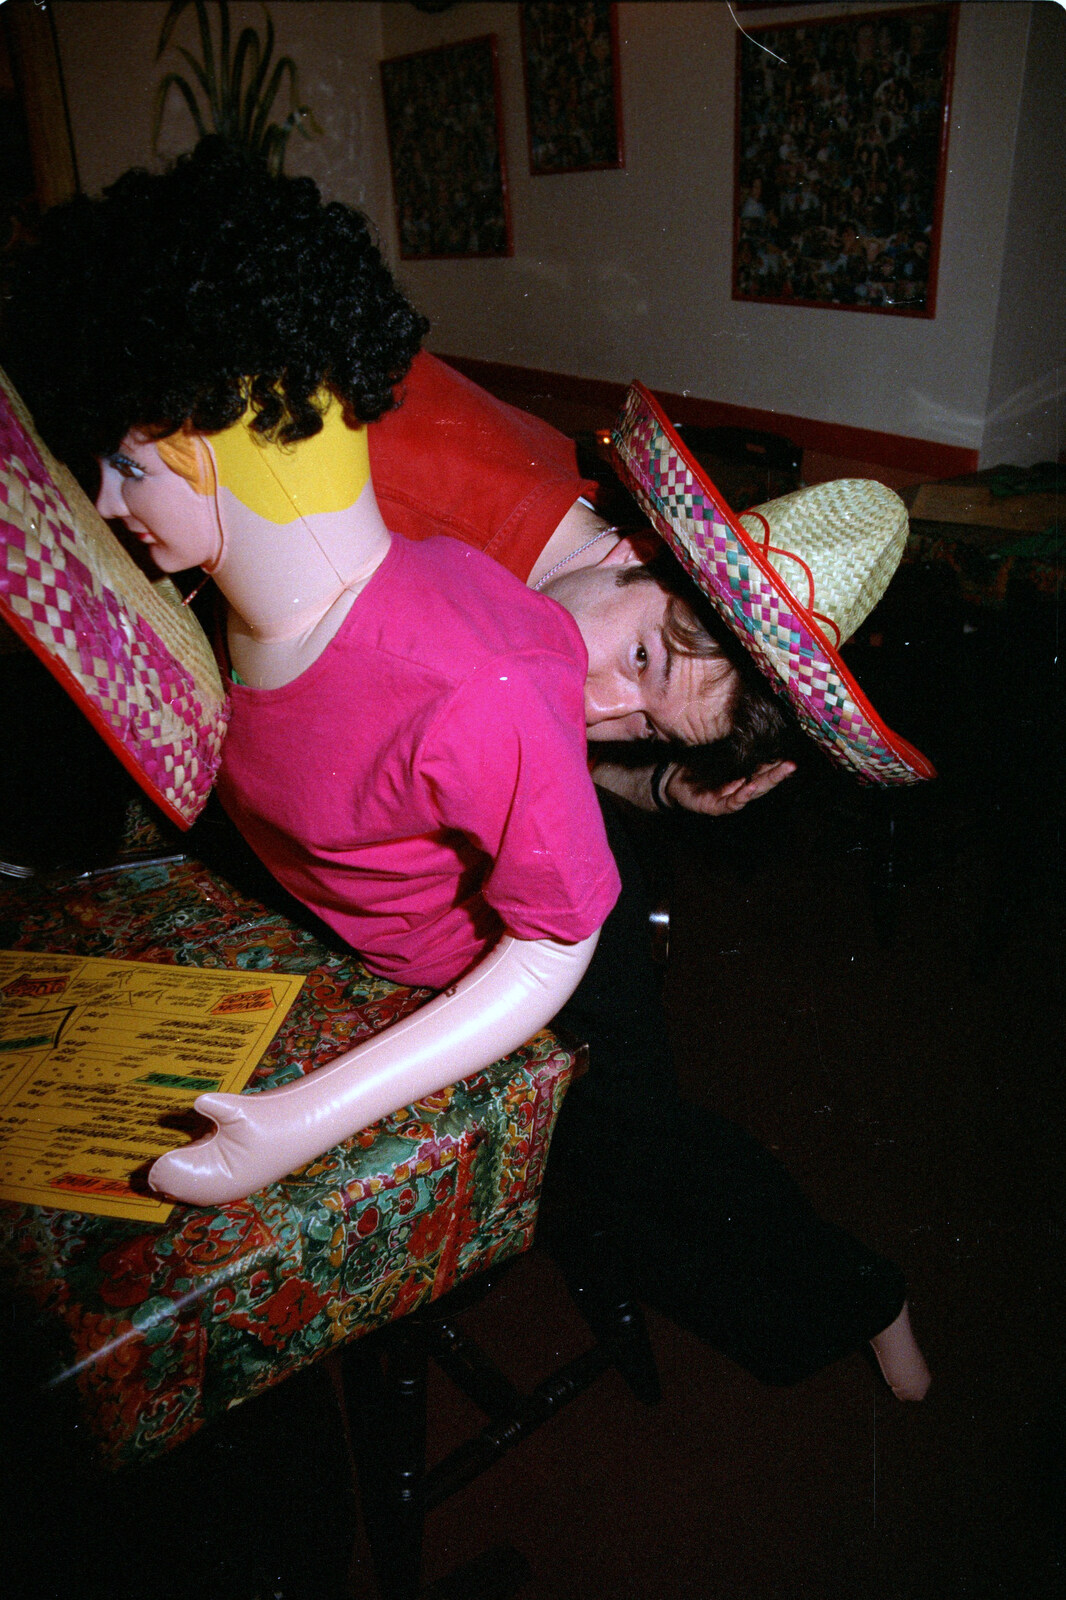 CISU, Los Mexicanos and the Inflatable Woman, Ipswich, Suffolk - 25th April 1996: Tim tops up the inflatable woman